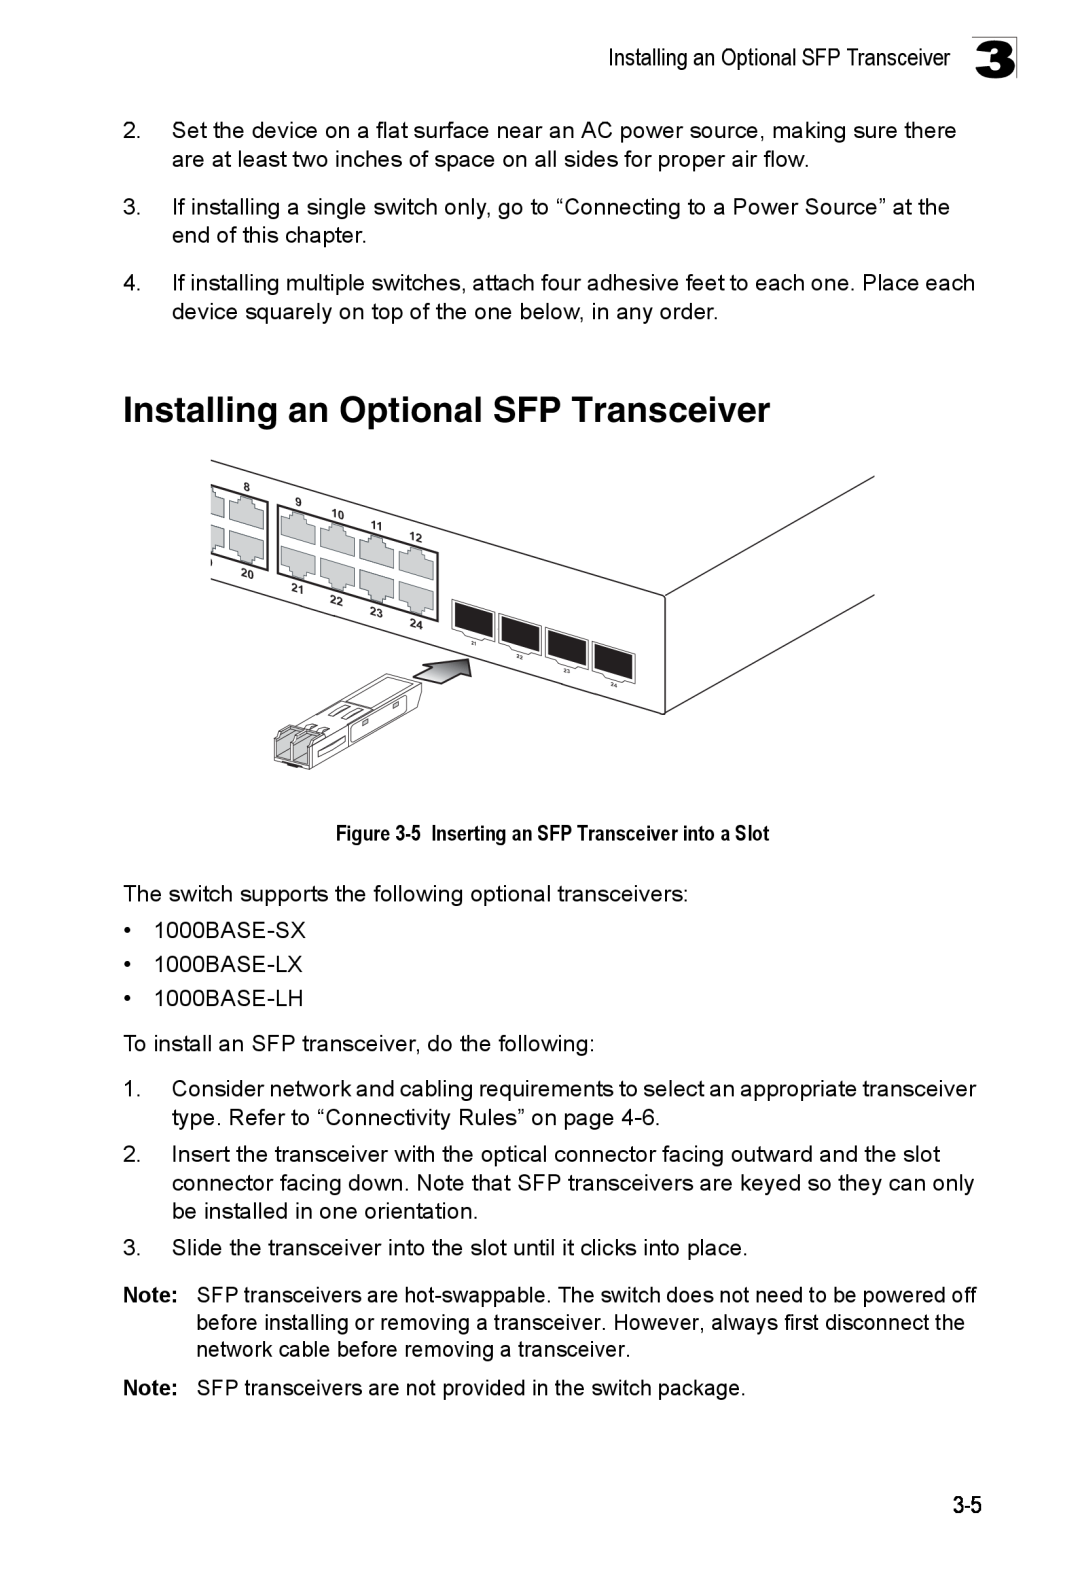 Accton Technology ES4324 manual Installing an Optional SFP Transceiver, 5 Inserting an SFP Transceiver into a Slot 